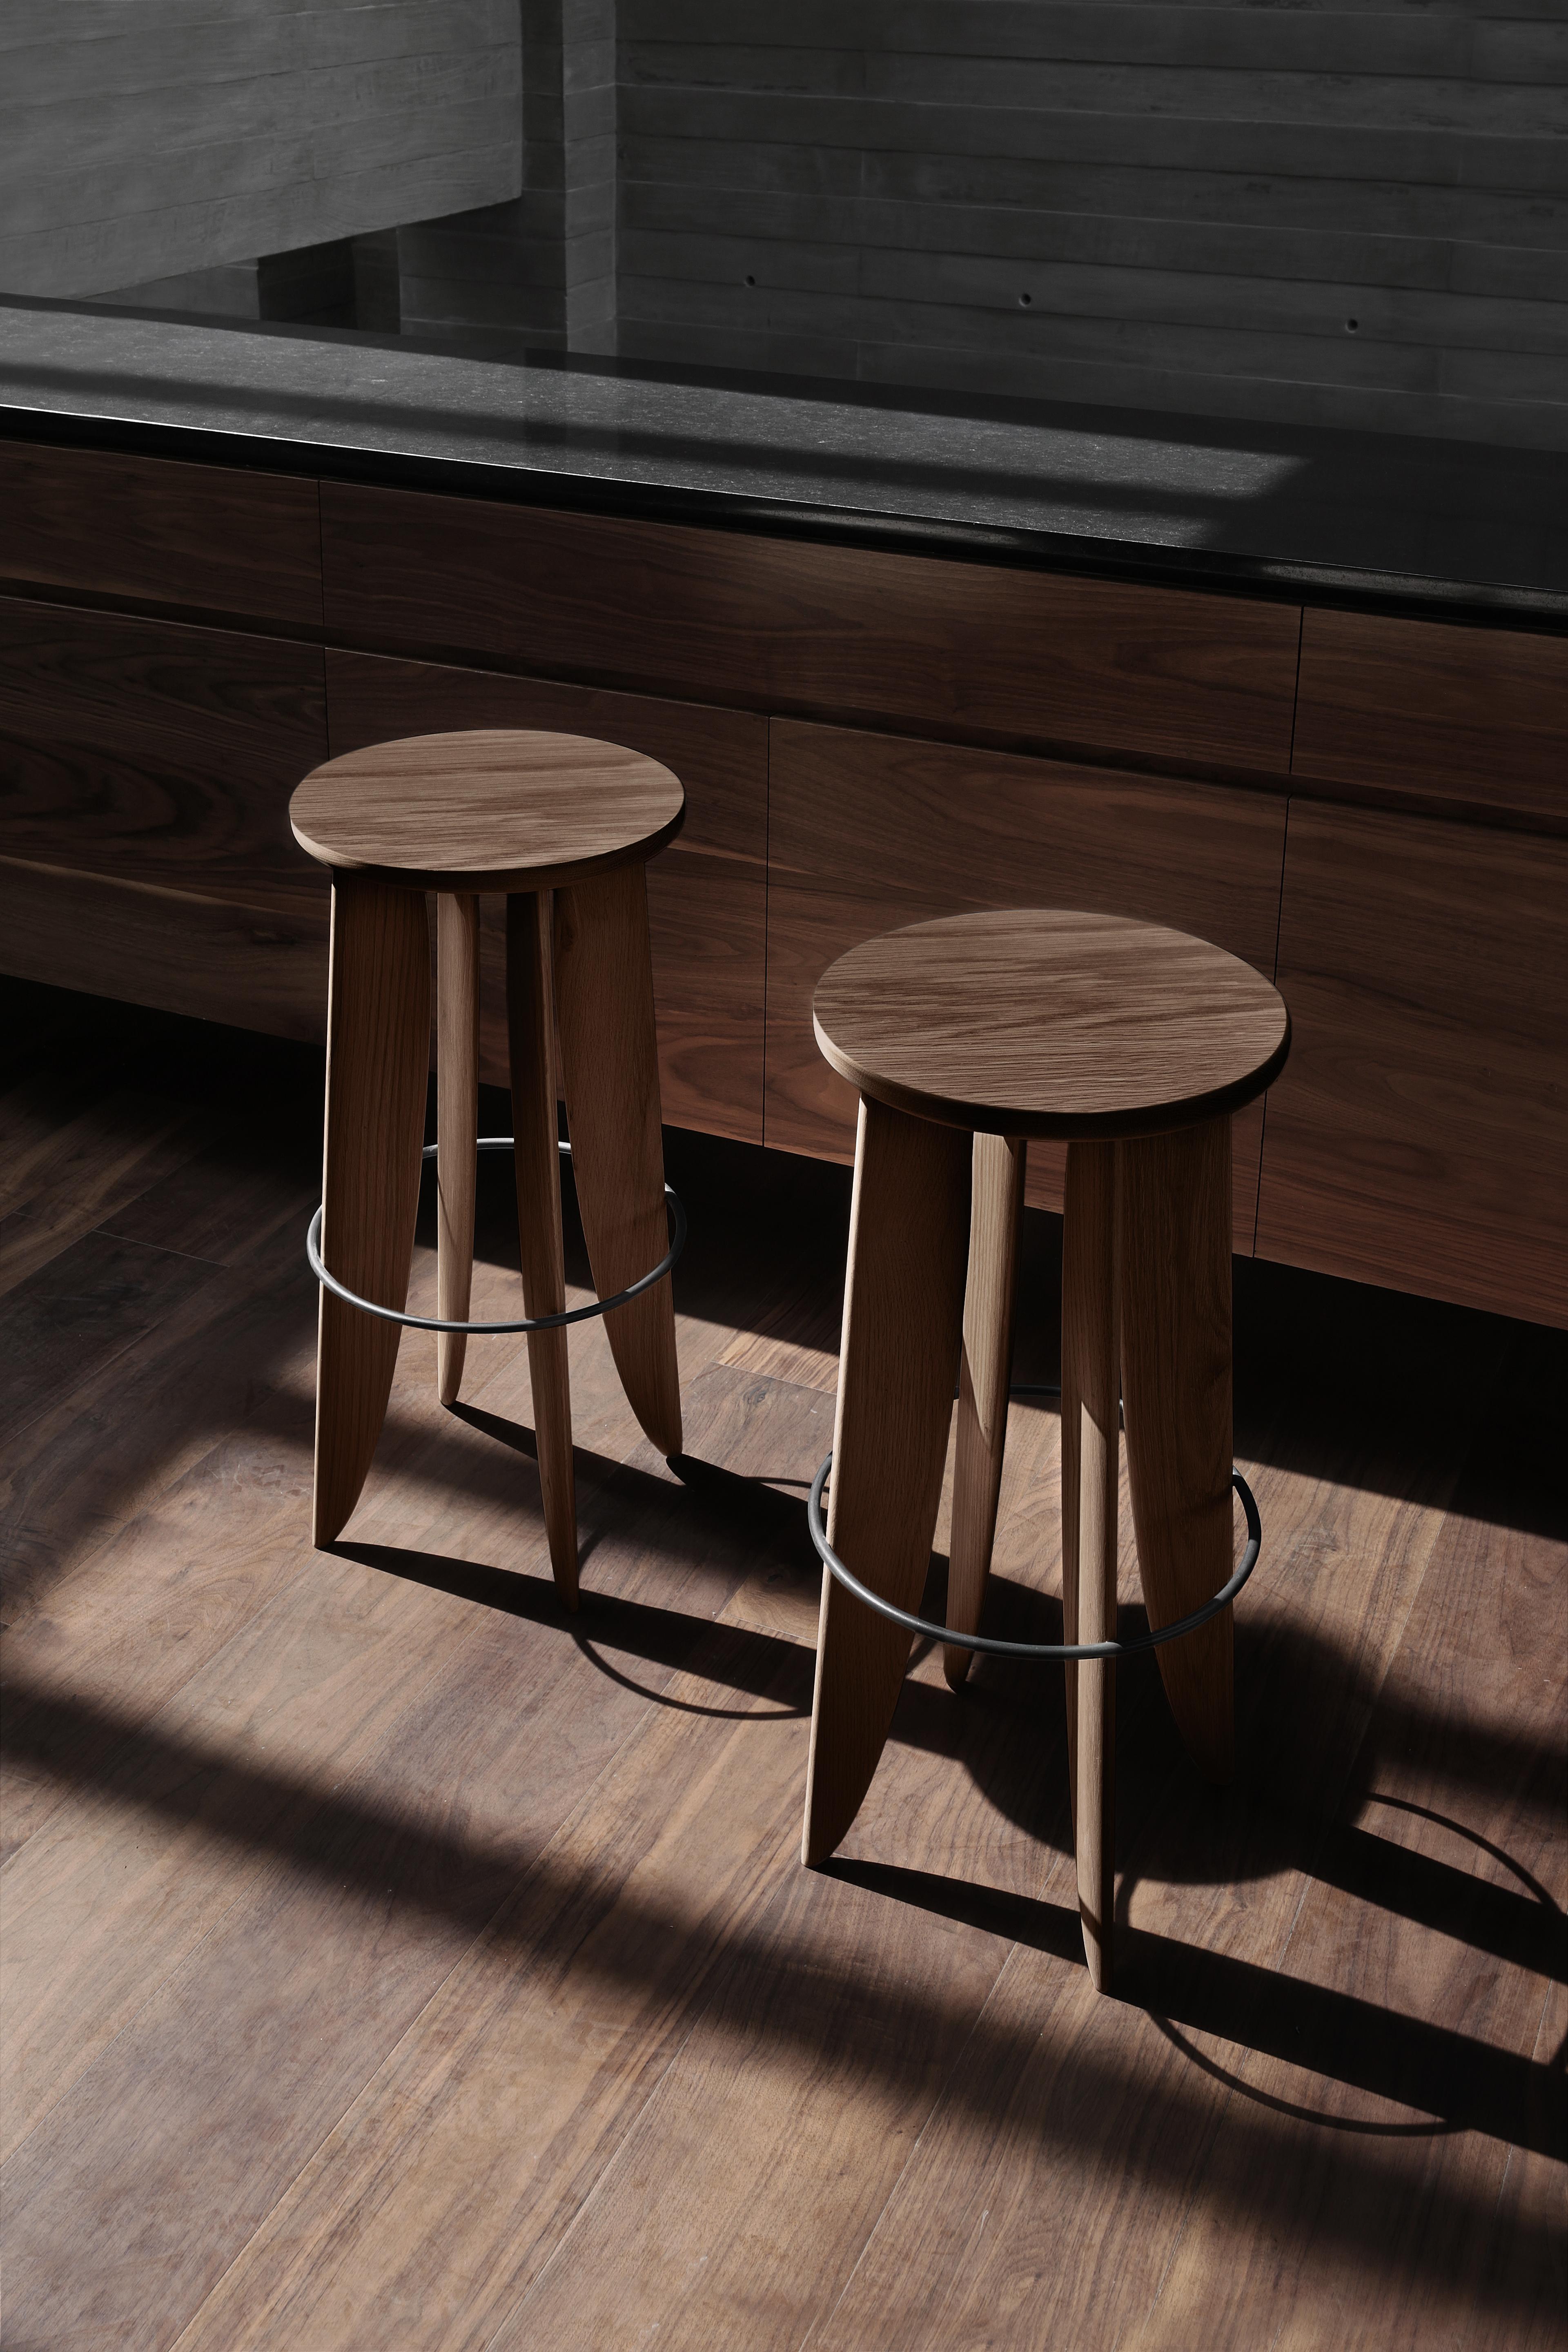 Noviembre XIII Counter Stool in Oak Wood by Joel Escalona

The Noviembre collection is inspired by the creative values of Constantin Brancusi, a Romanian sculptor considered one of the most influential artists of the twentieth century, who,